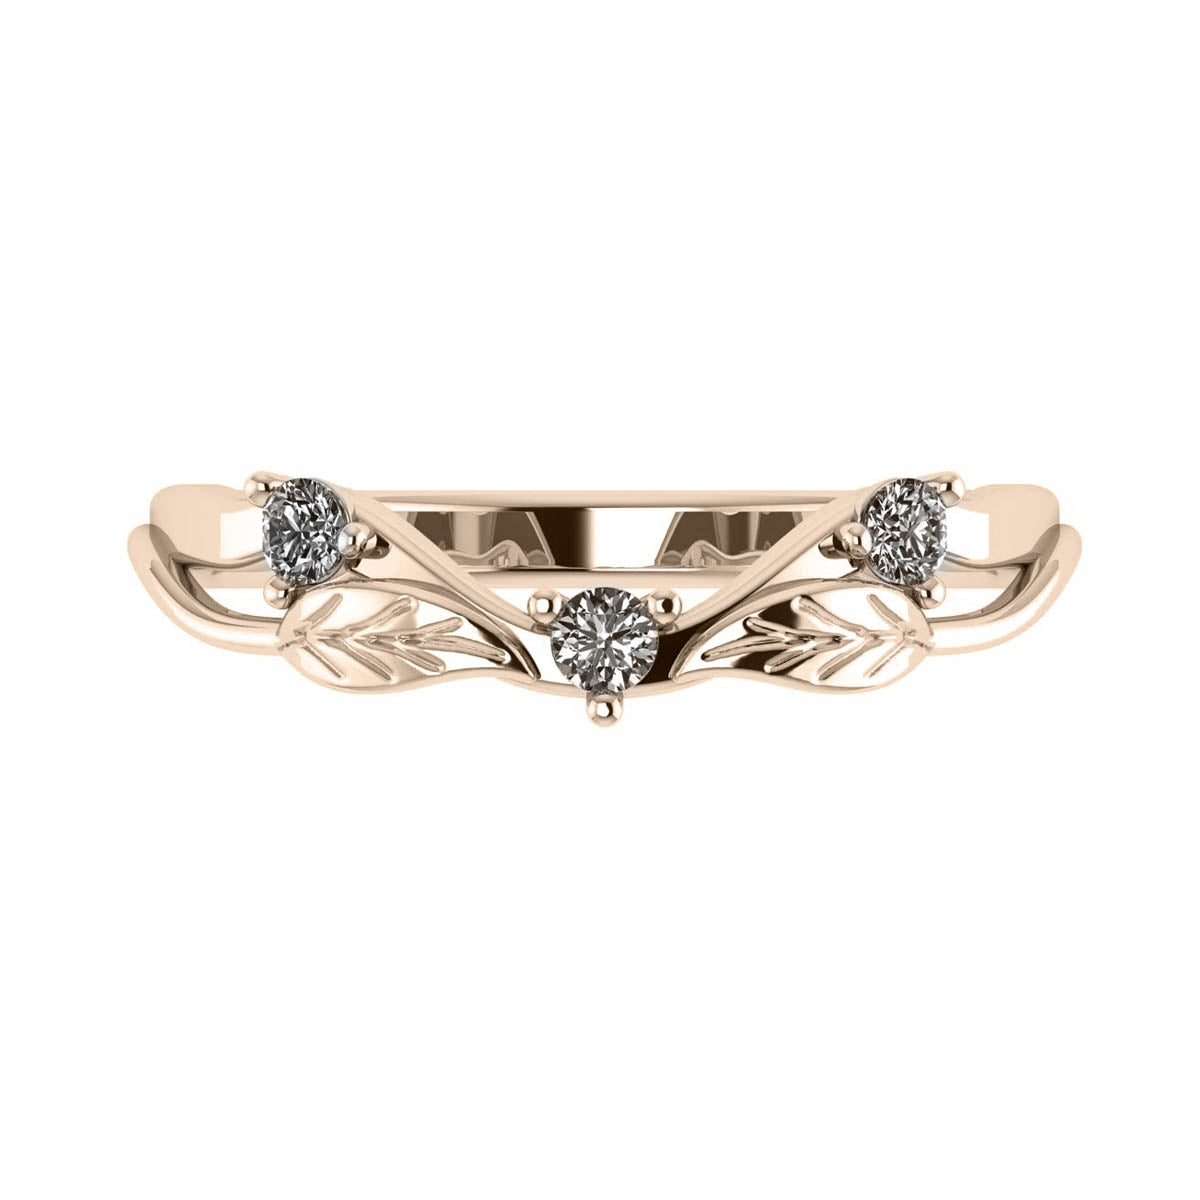 Matching wedding band for Clematis: choose yours - Eden Garden Jewelry™